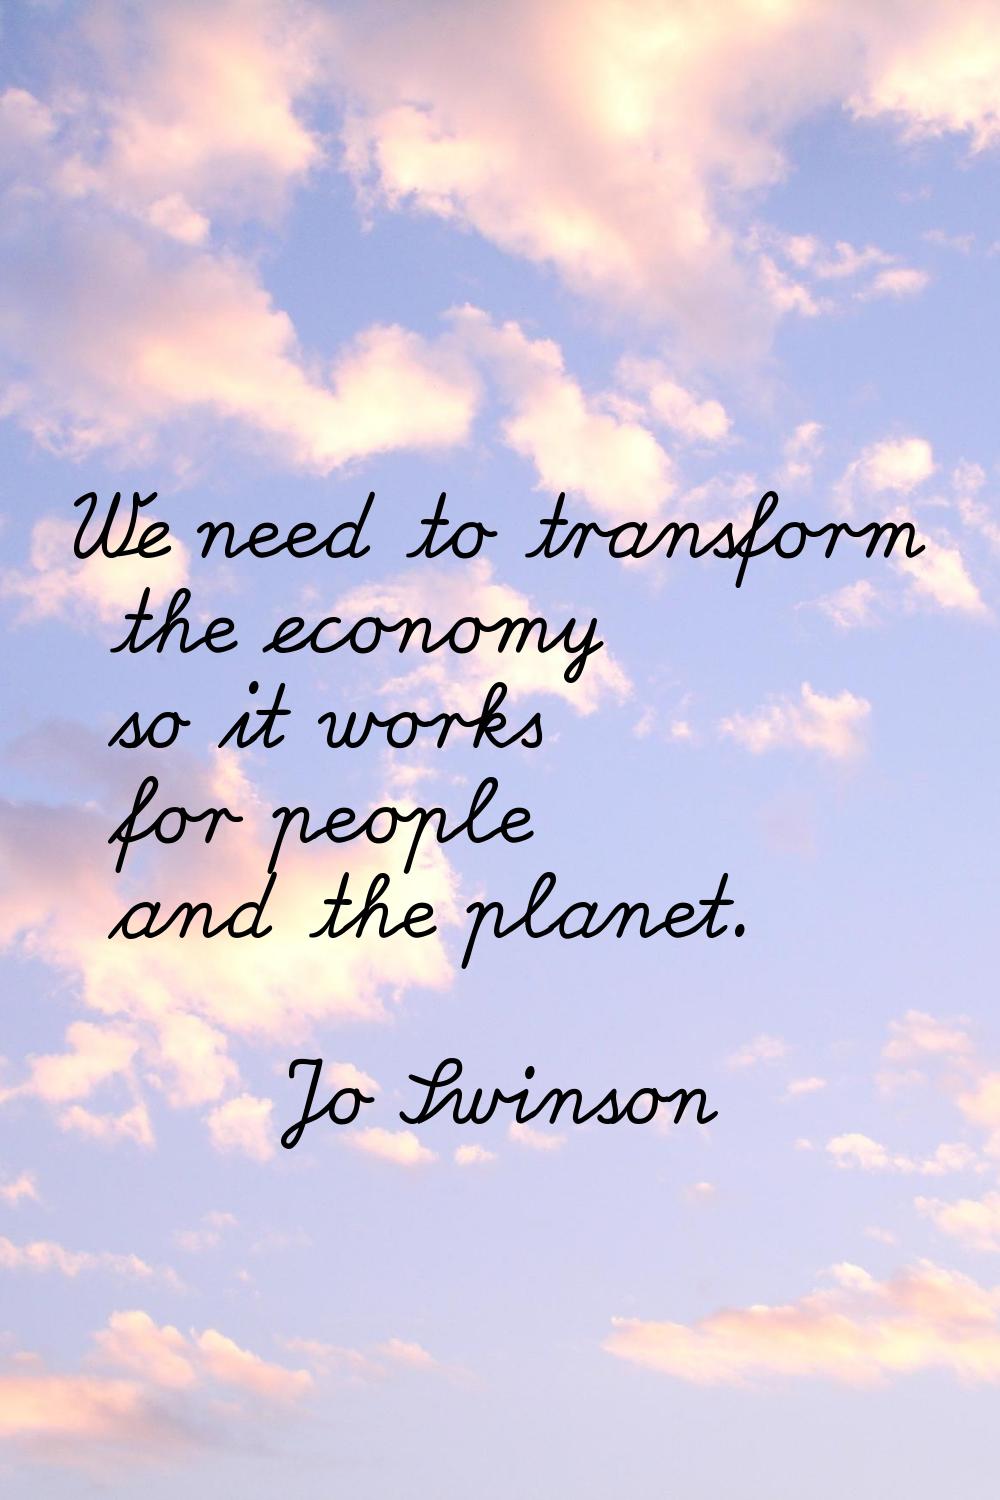 We need to transform the economy so it works for people and the planet.